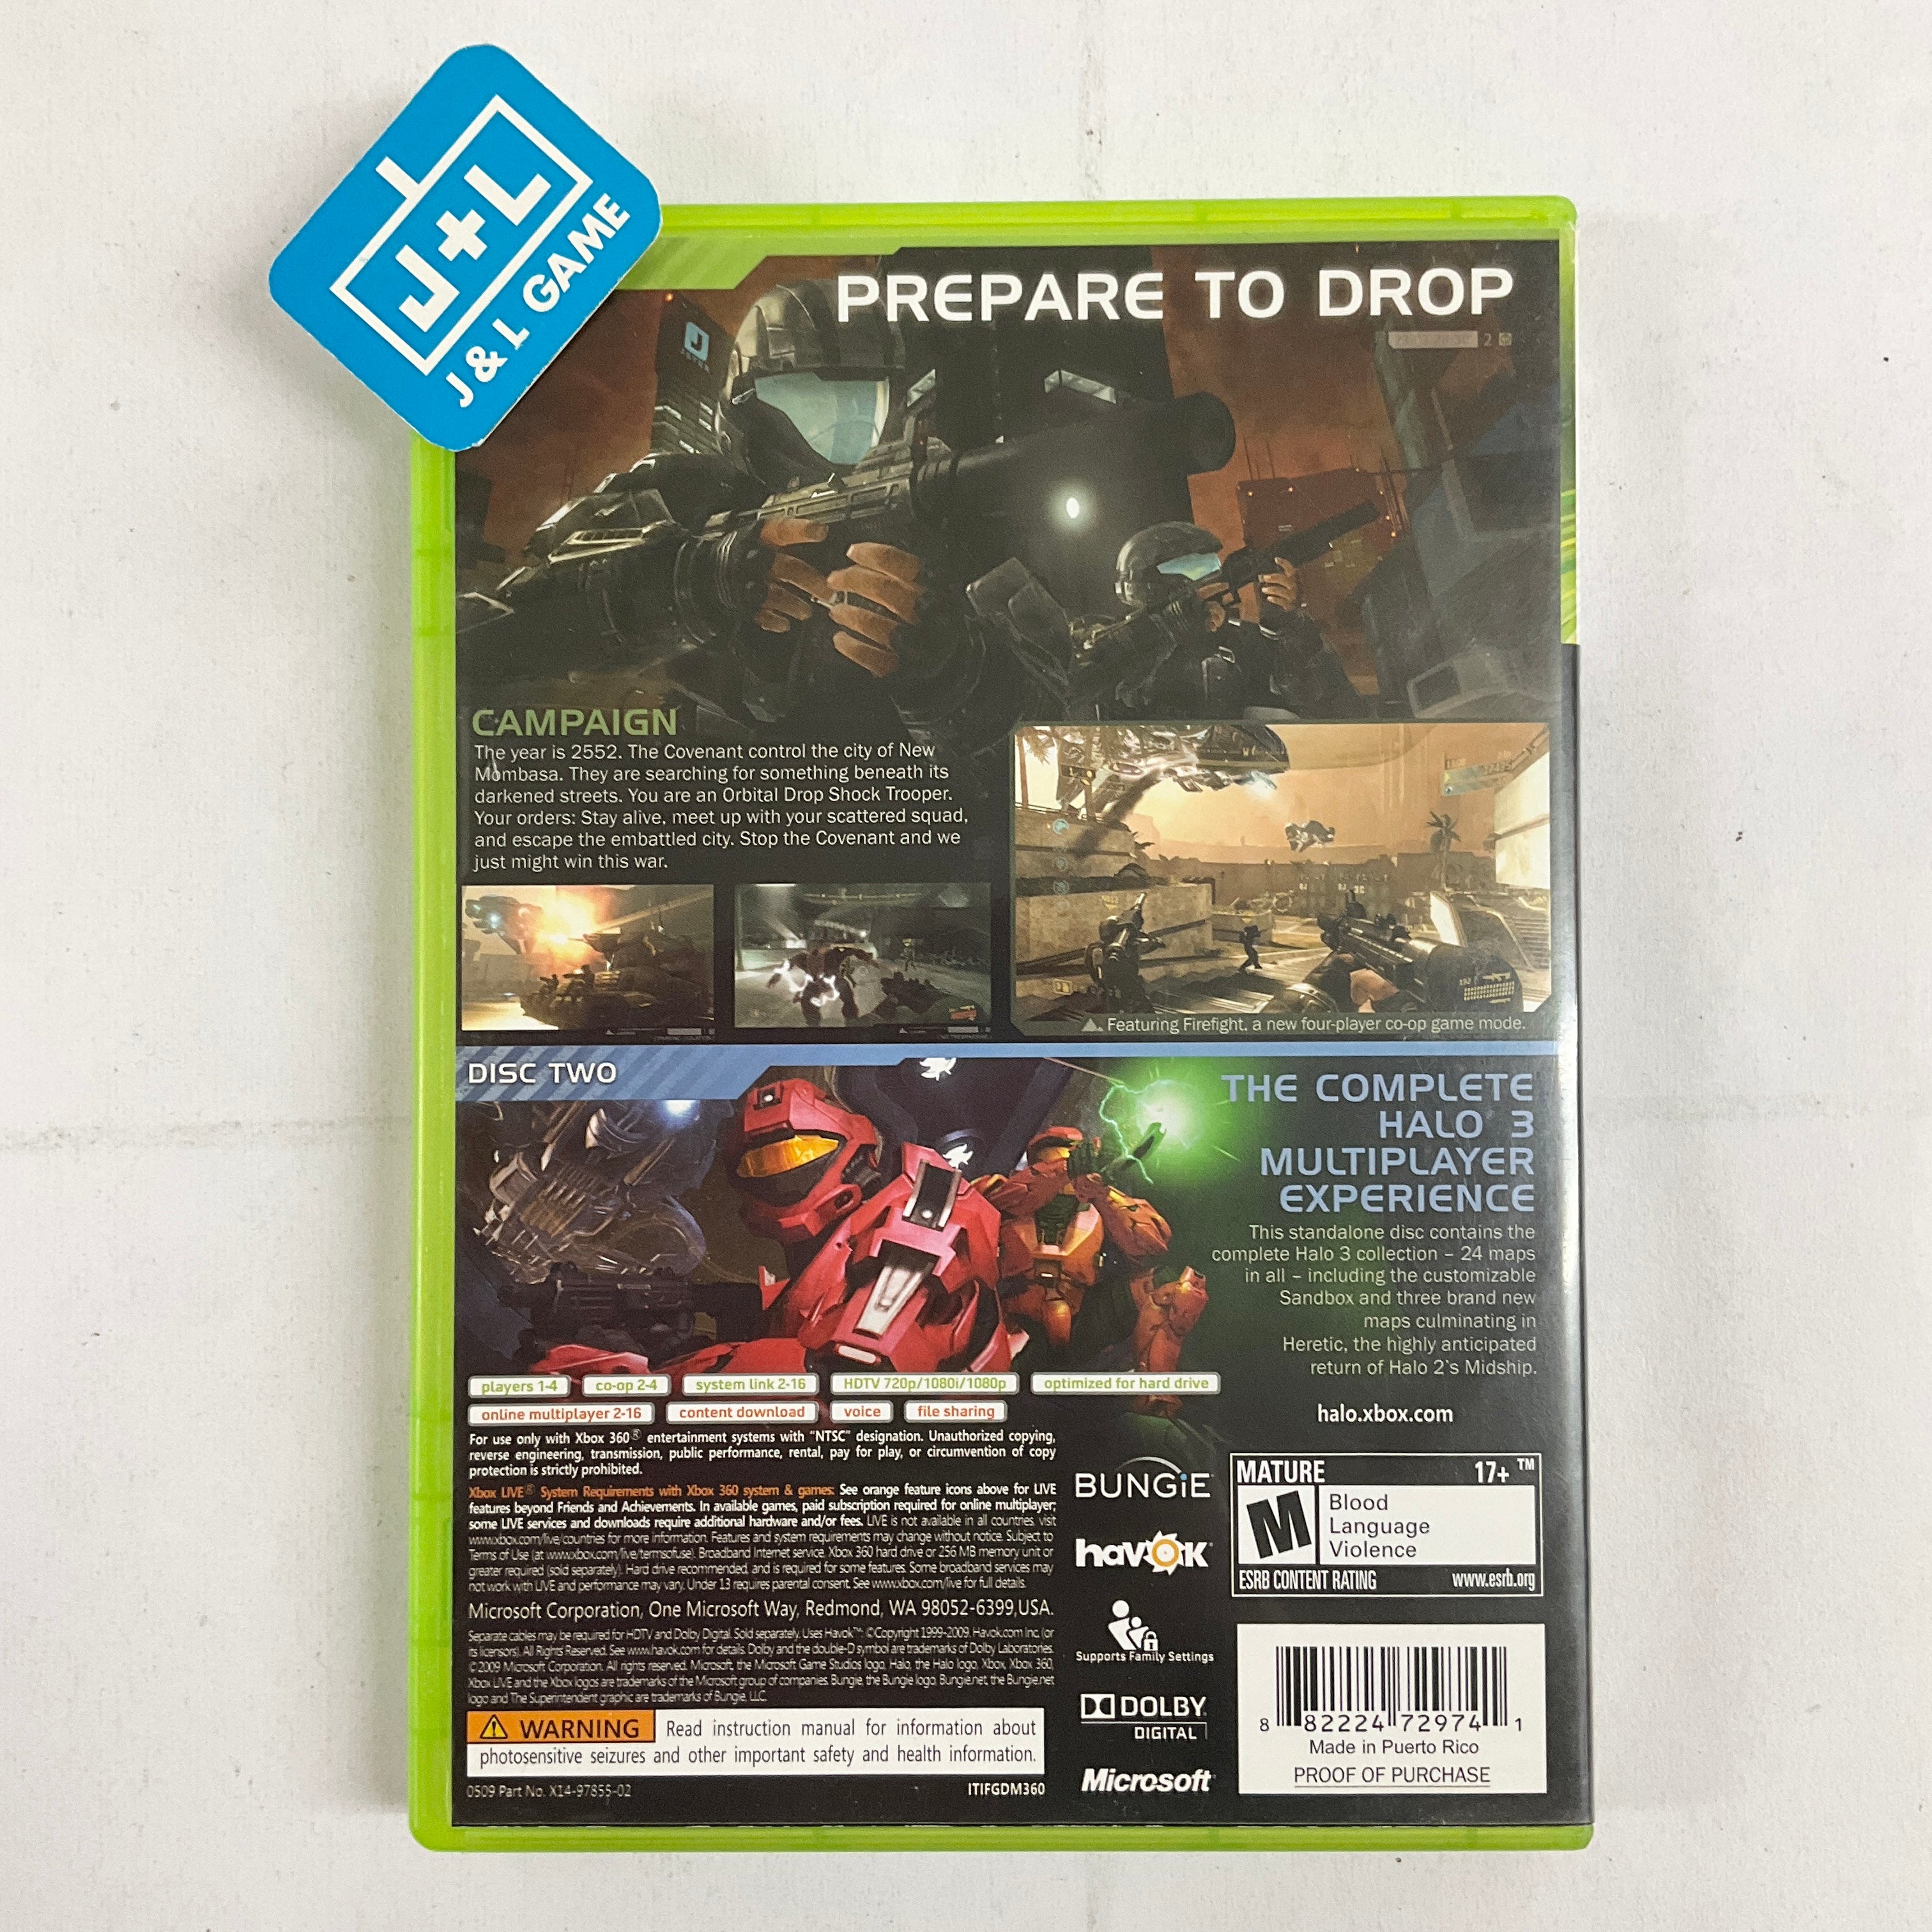 Halo 3: ODST - Xbox 360 [Pre-Owned] Video Games Microsoft Game Studios   